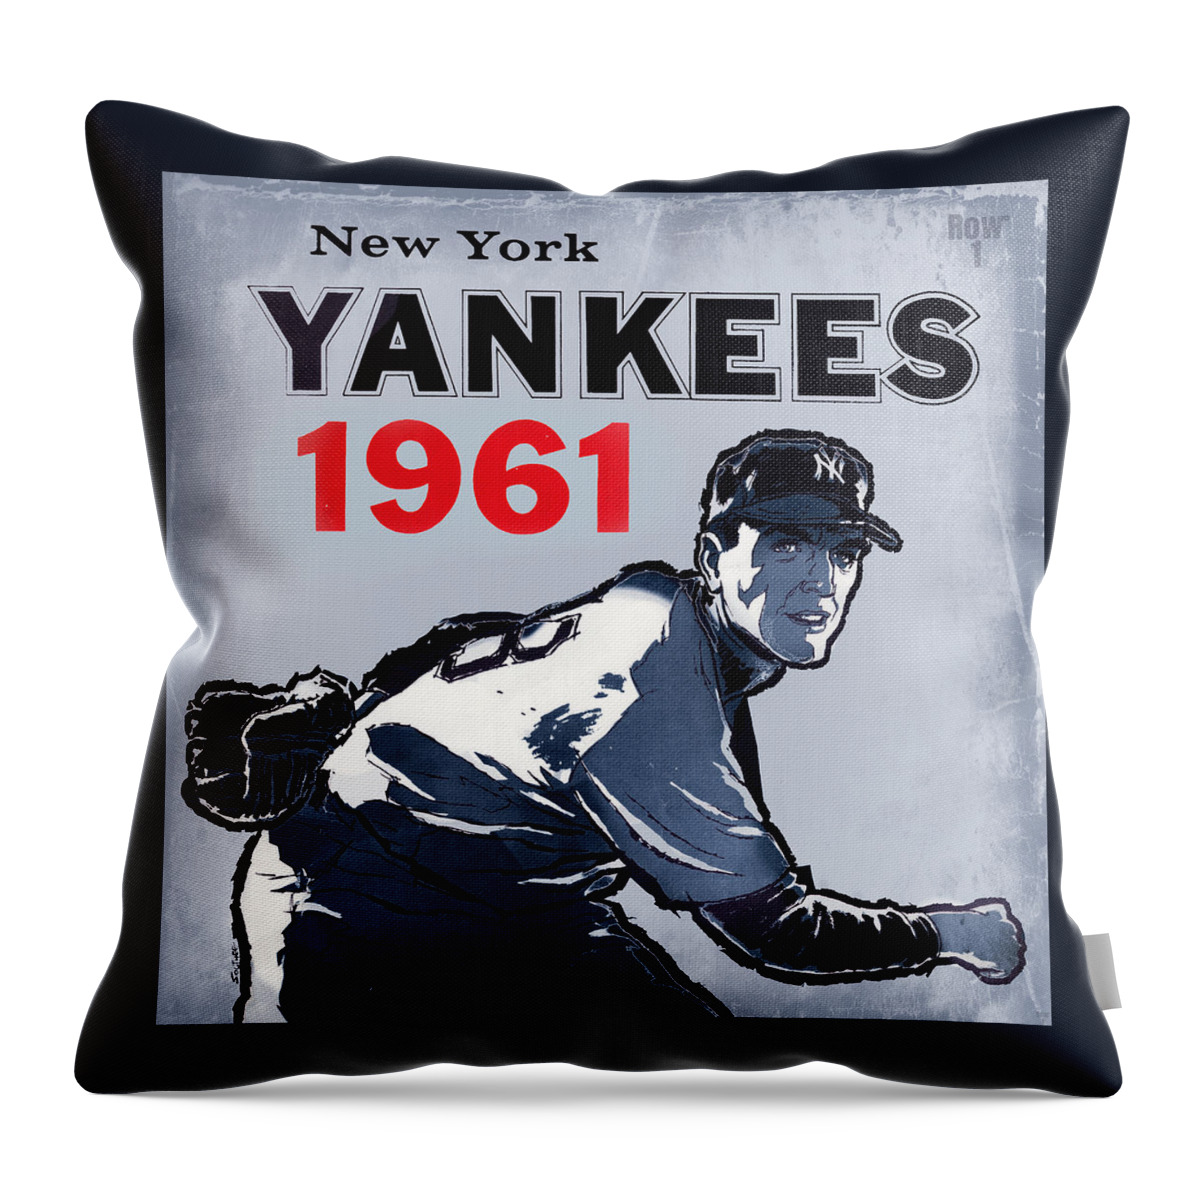 1961 Throw Pillow featuring the mixed media 1961 New York Yankees Art by Row One Brand